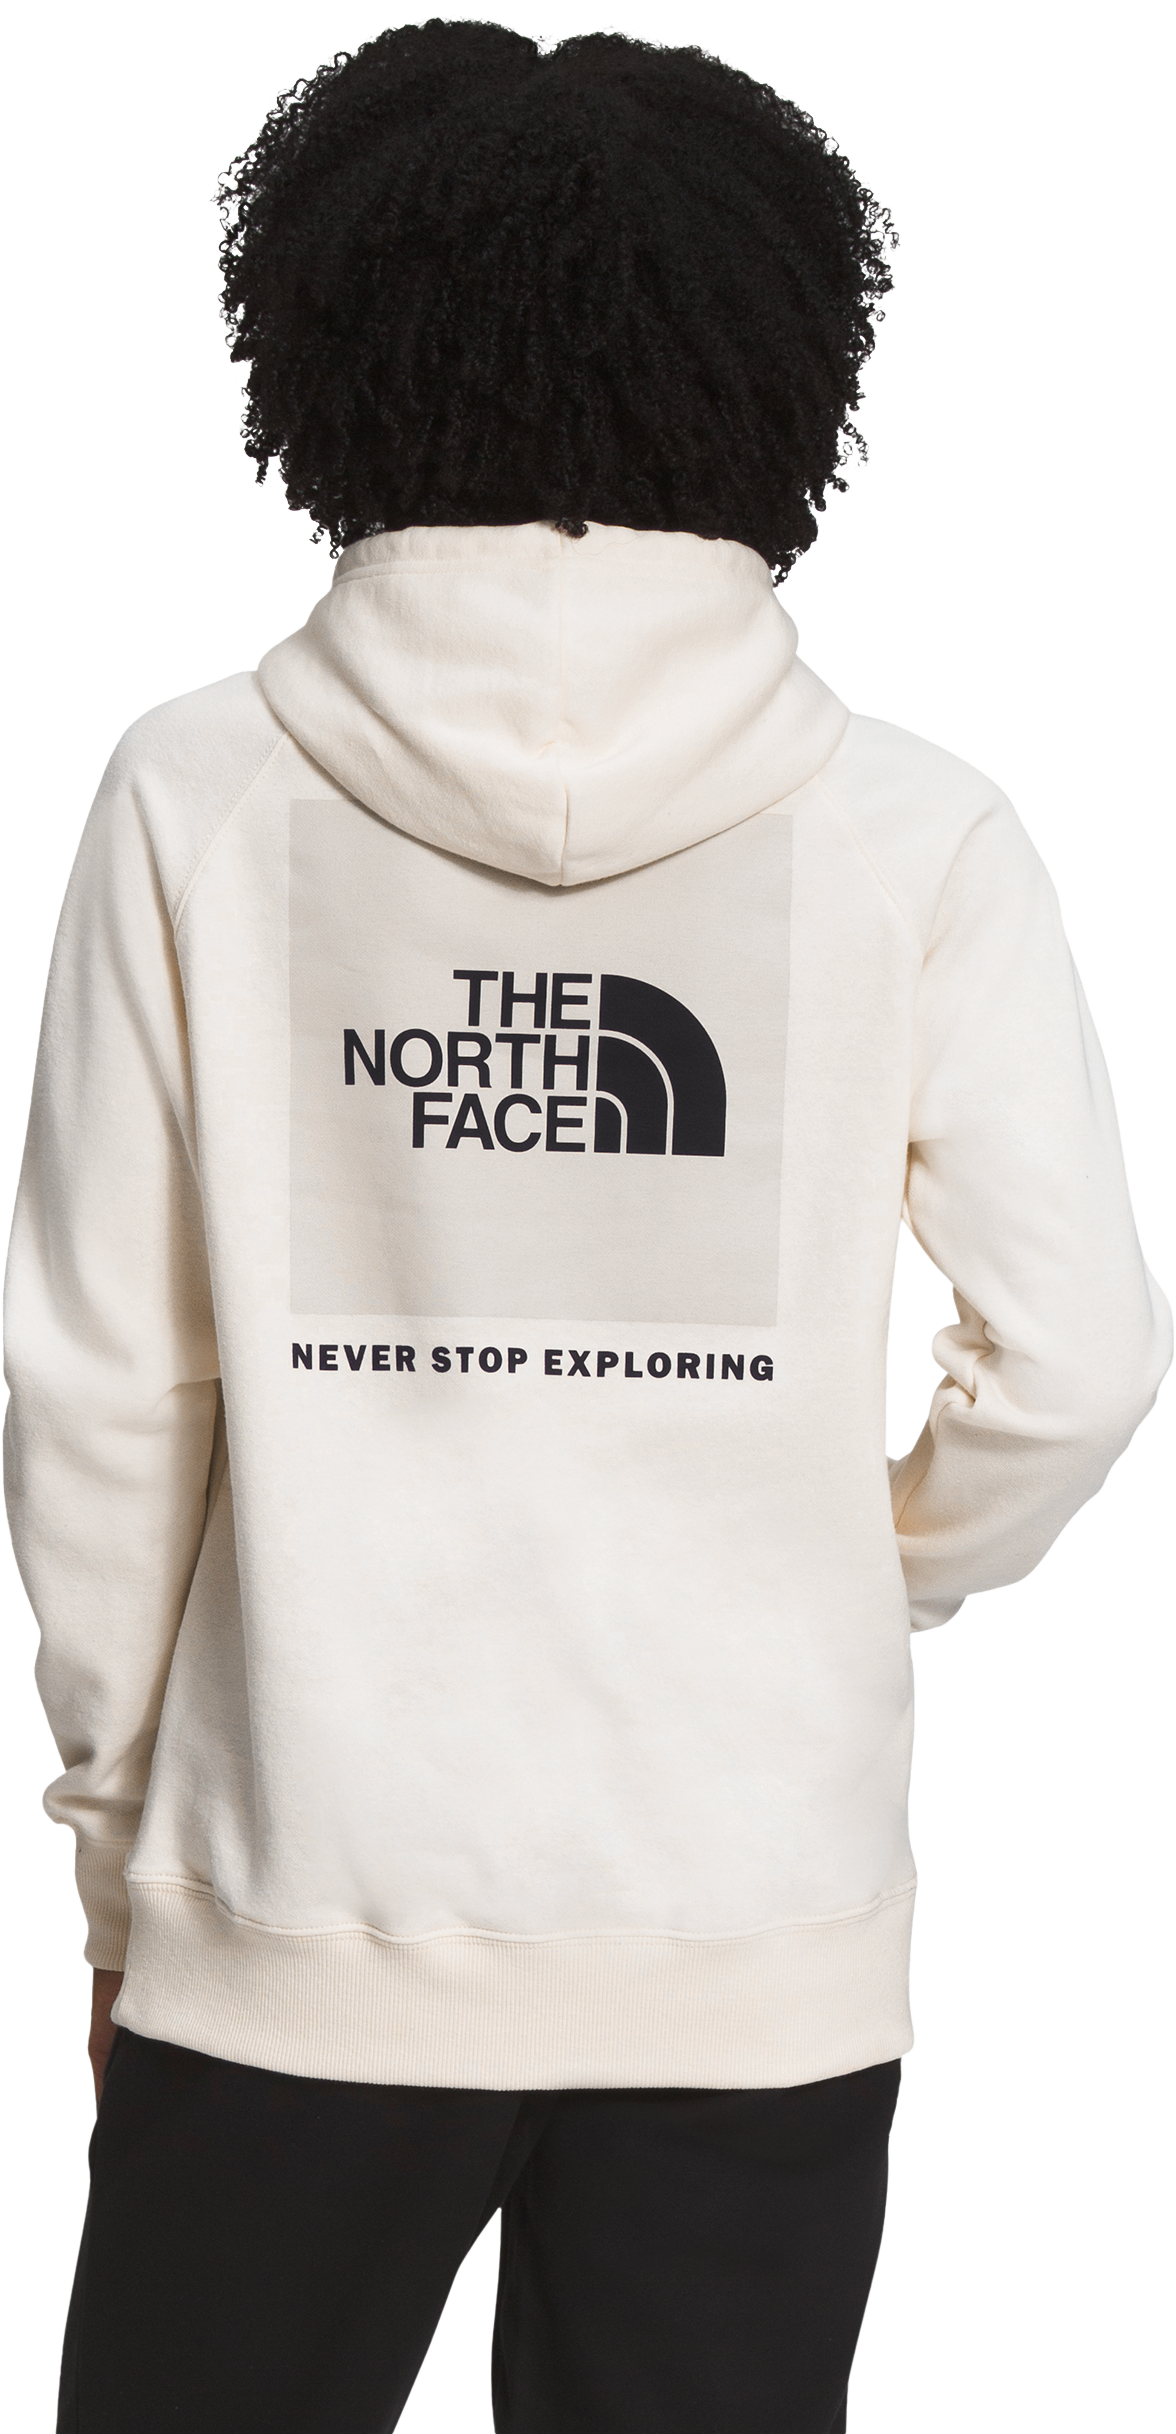 The North Face Box NSE Long-Sleeve Hoodie for Ladies - Gardenia White - XXL